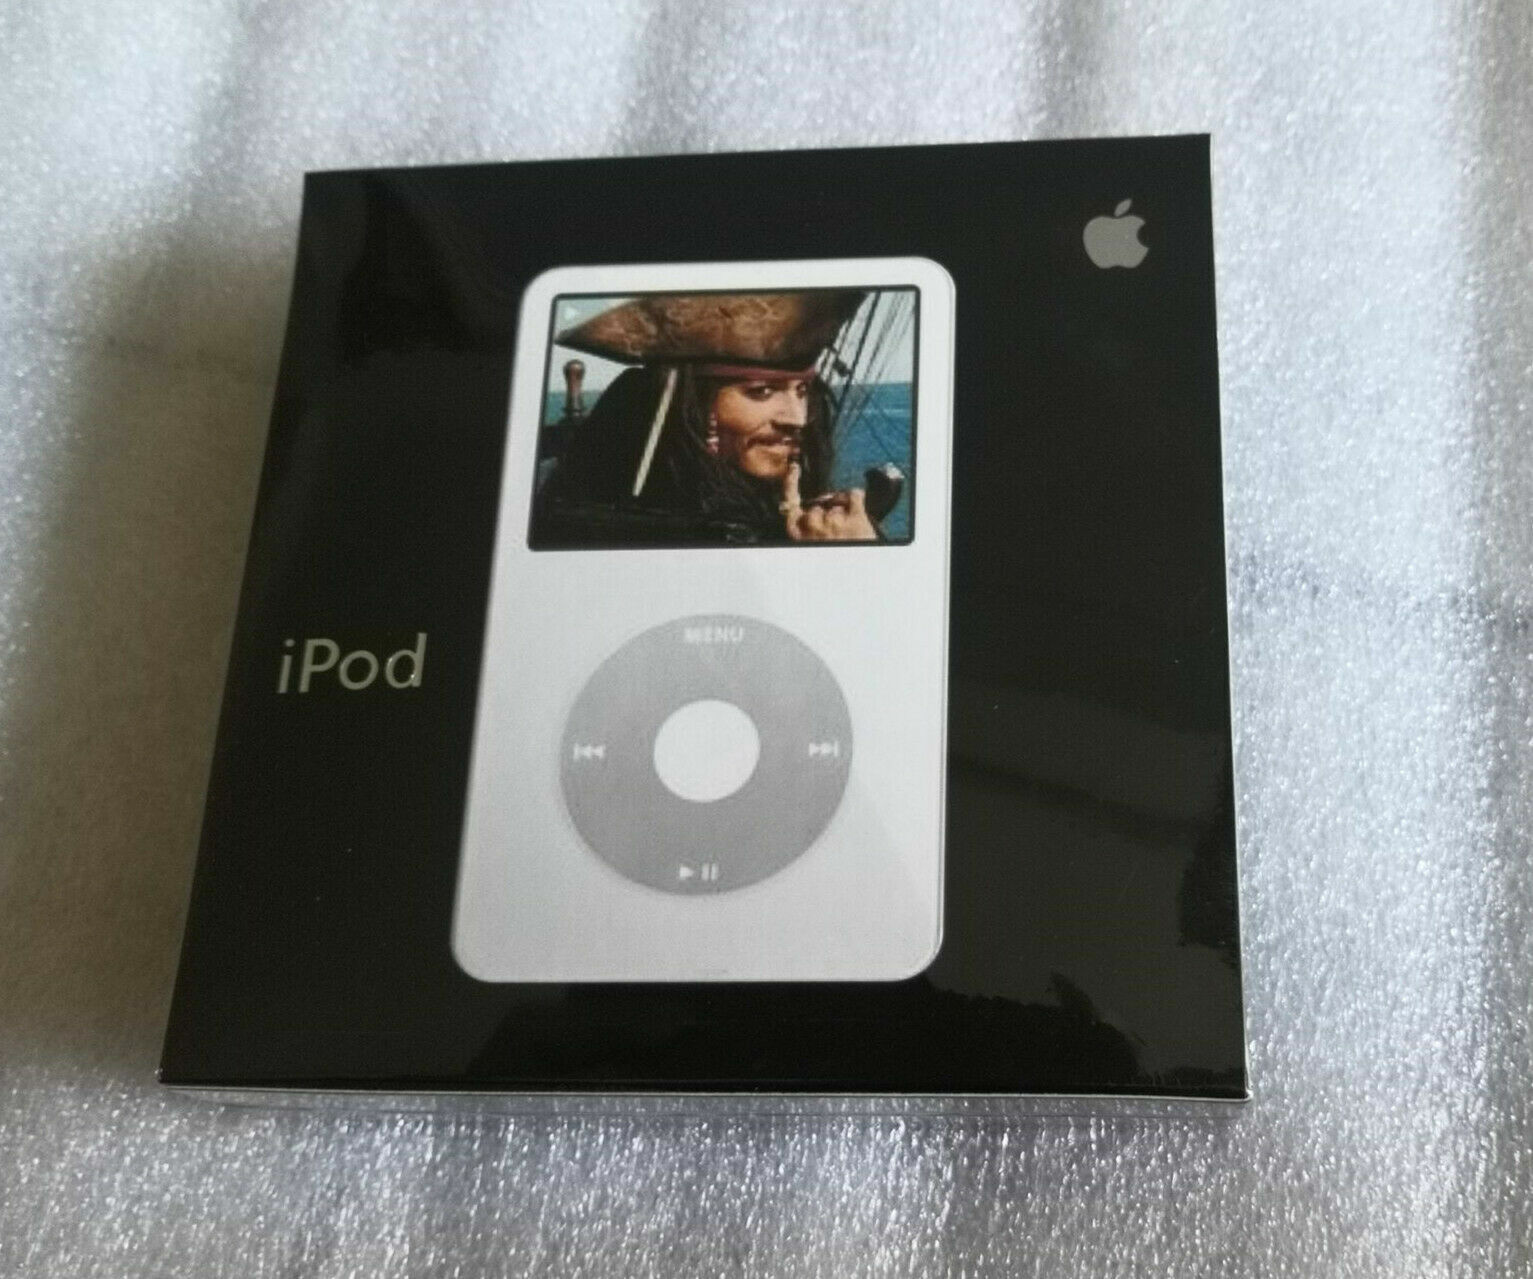 Apple iPod classic 5th Generation White (60 GB) for sale online | eBay